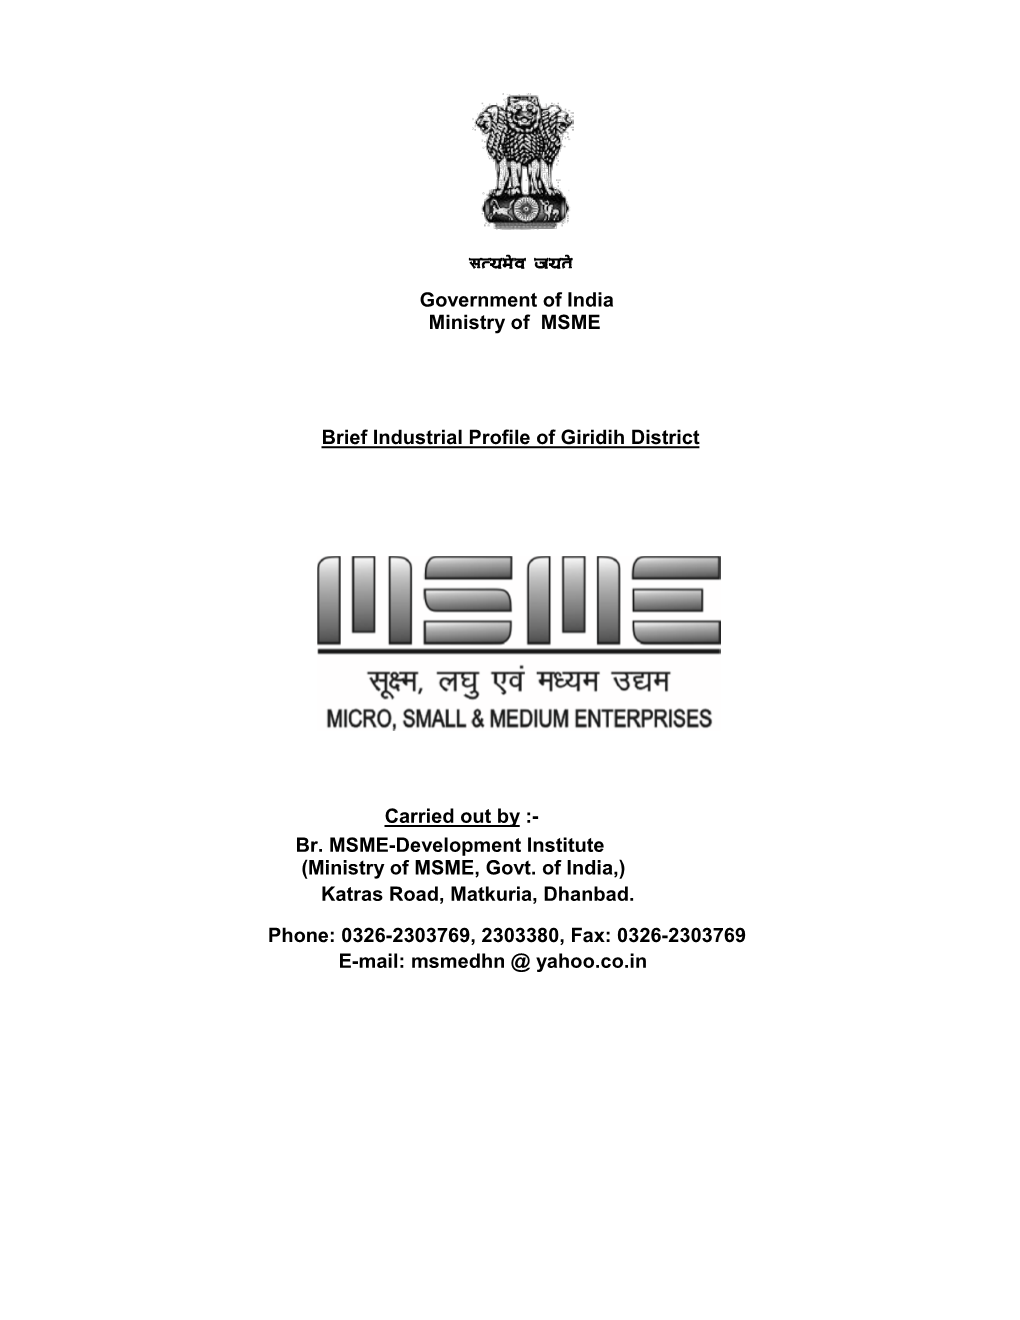 Lr;Eso T;Rs Government of India Ministry of MSME Brief Industrial